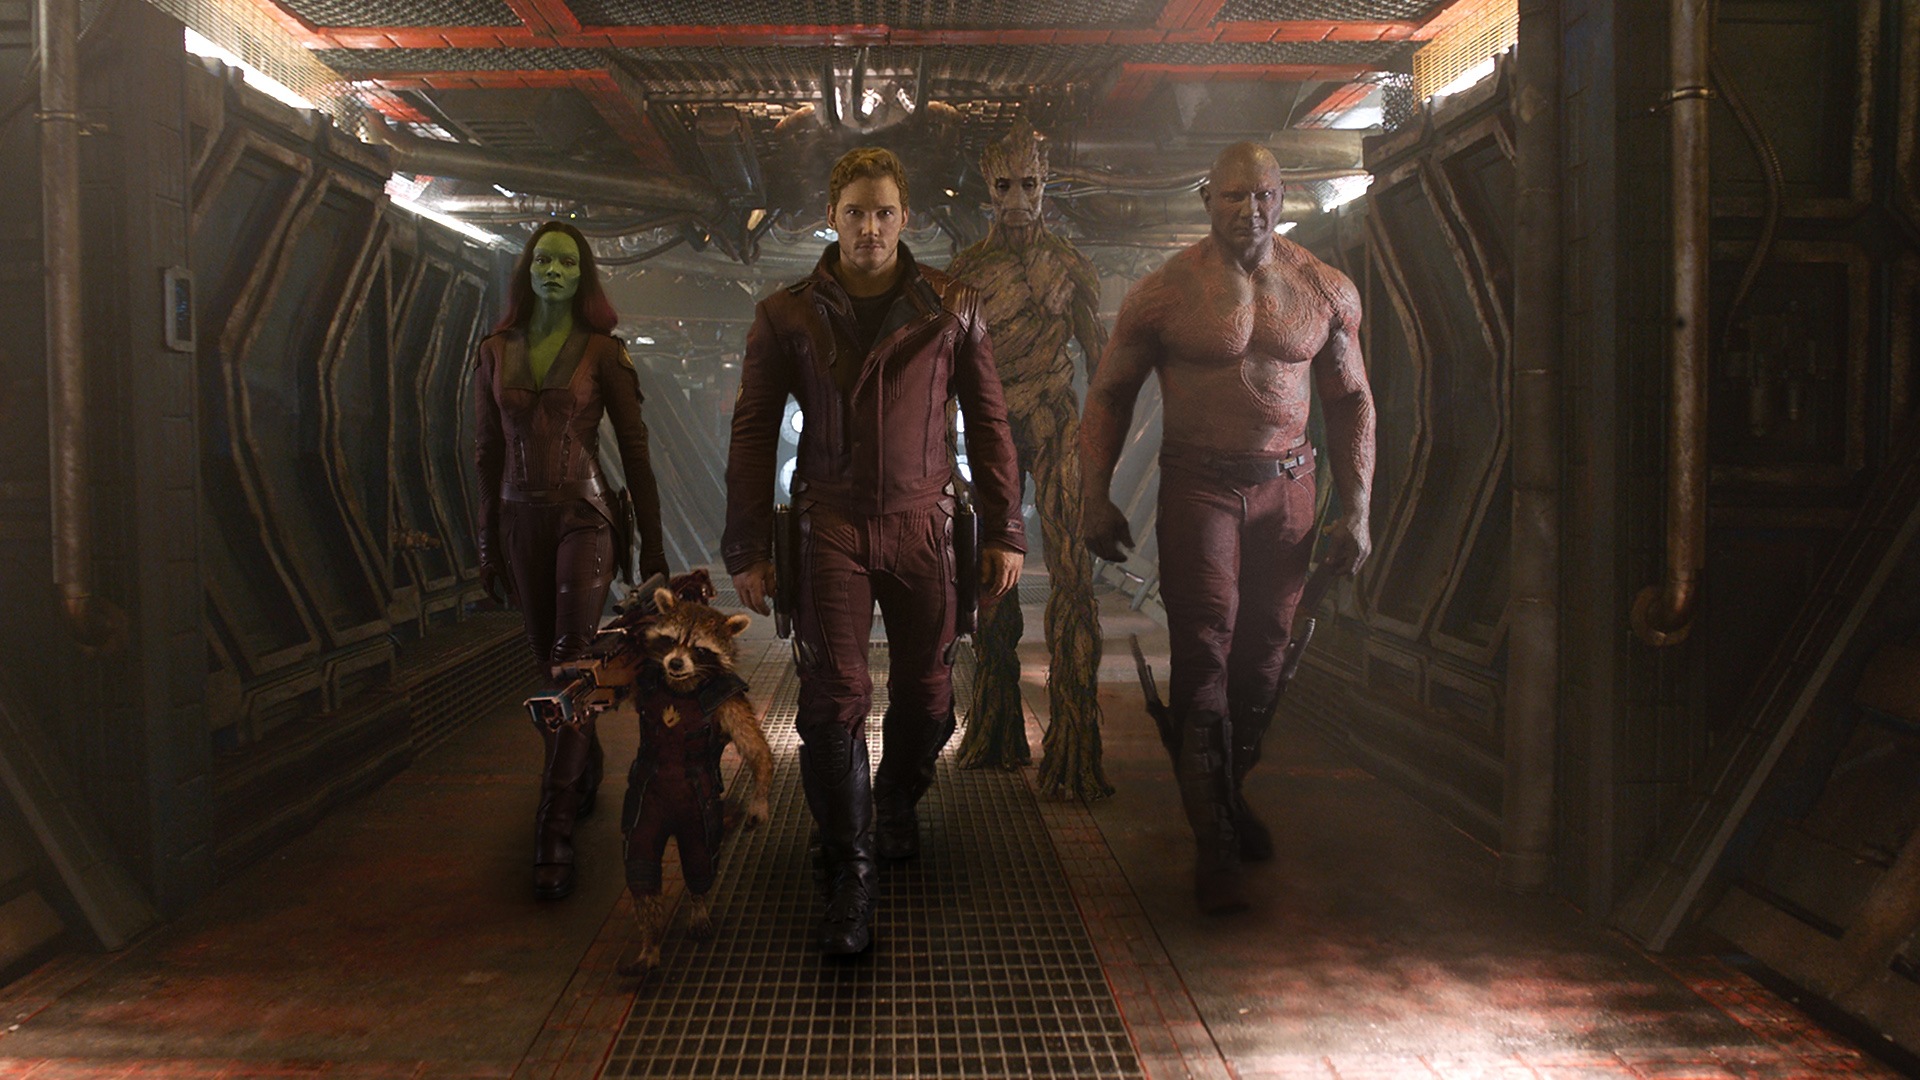 Guardians of the Galaxy 2014 HD movie wallpapers #2 - 1920x1080